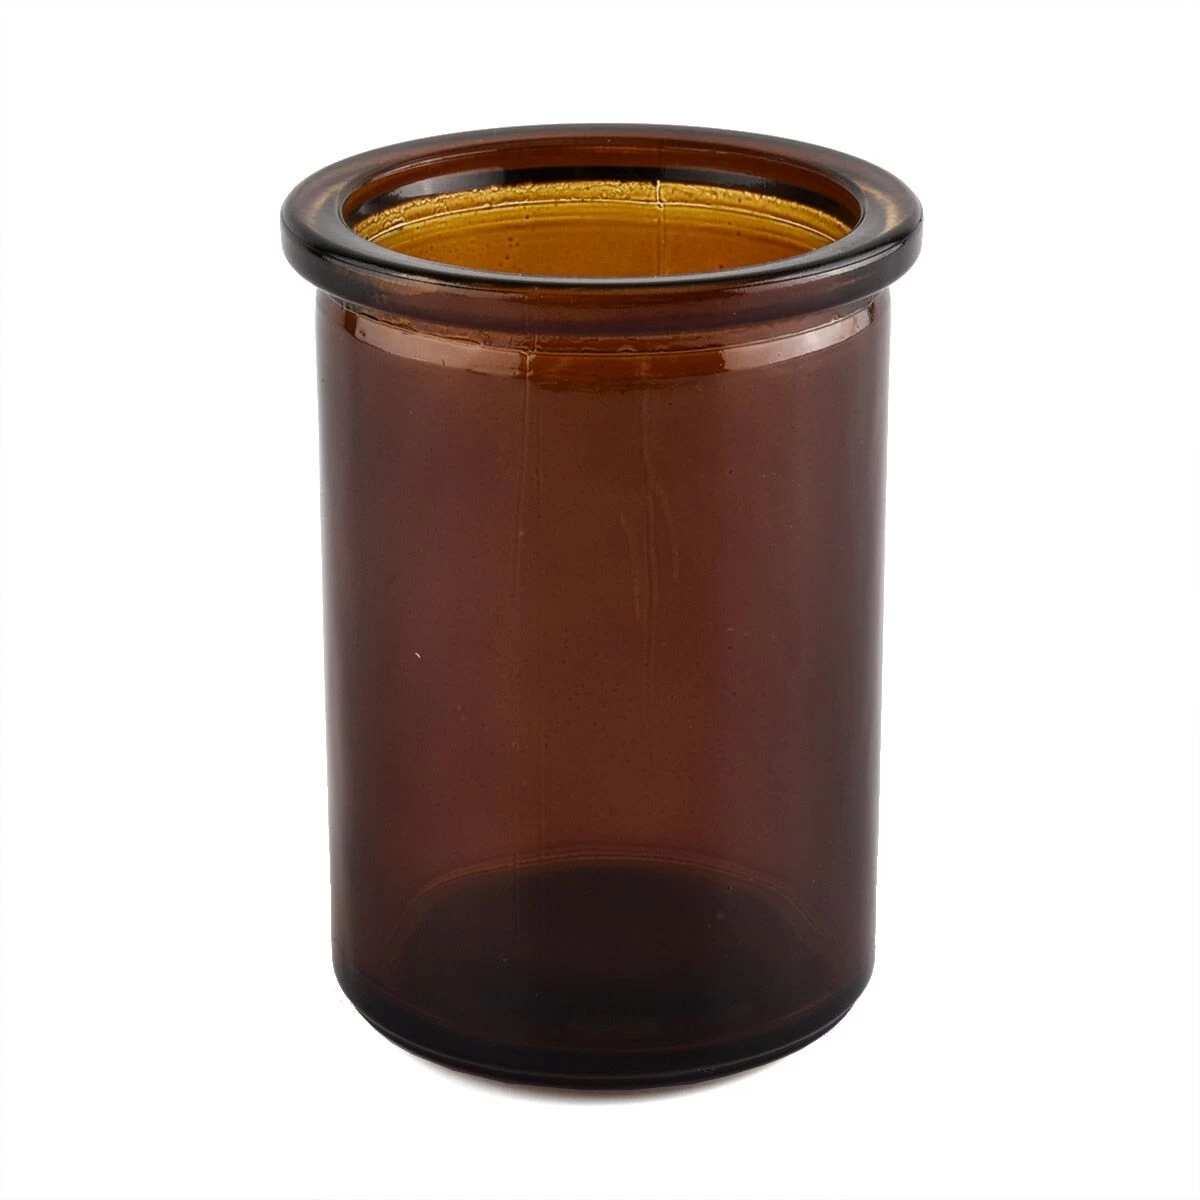 5oz amber glass candle jar with cork lid